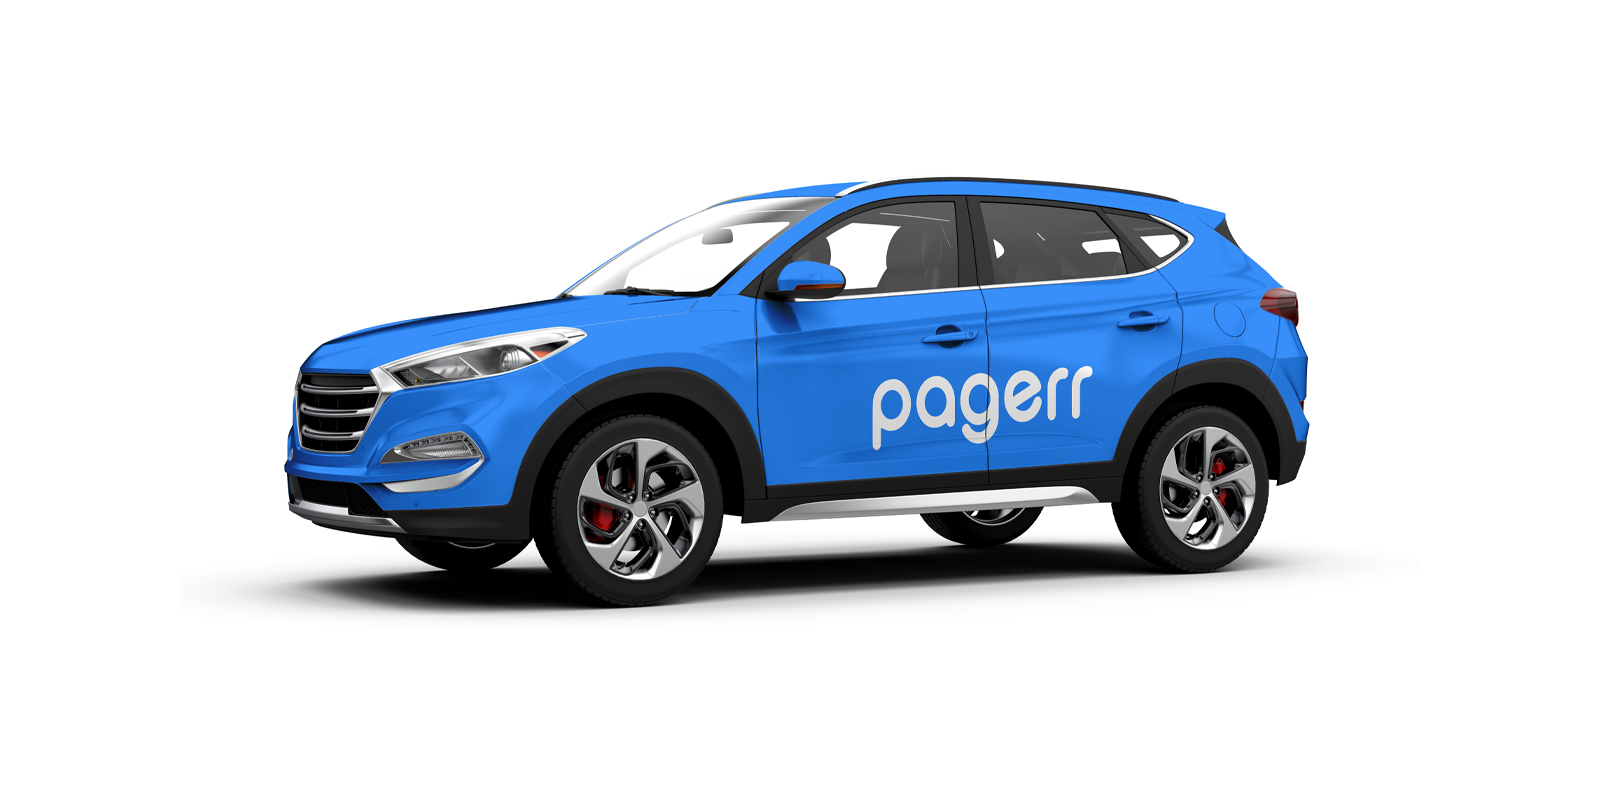 Car signs in Canberra - Print with Pagerr